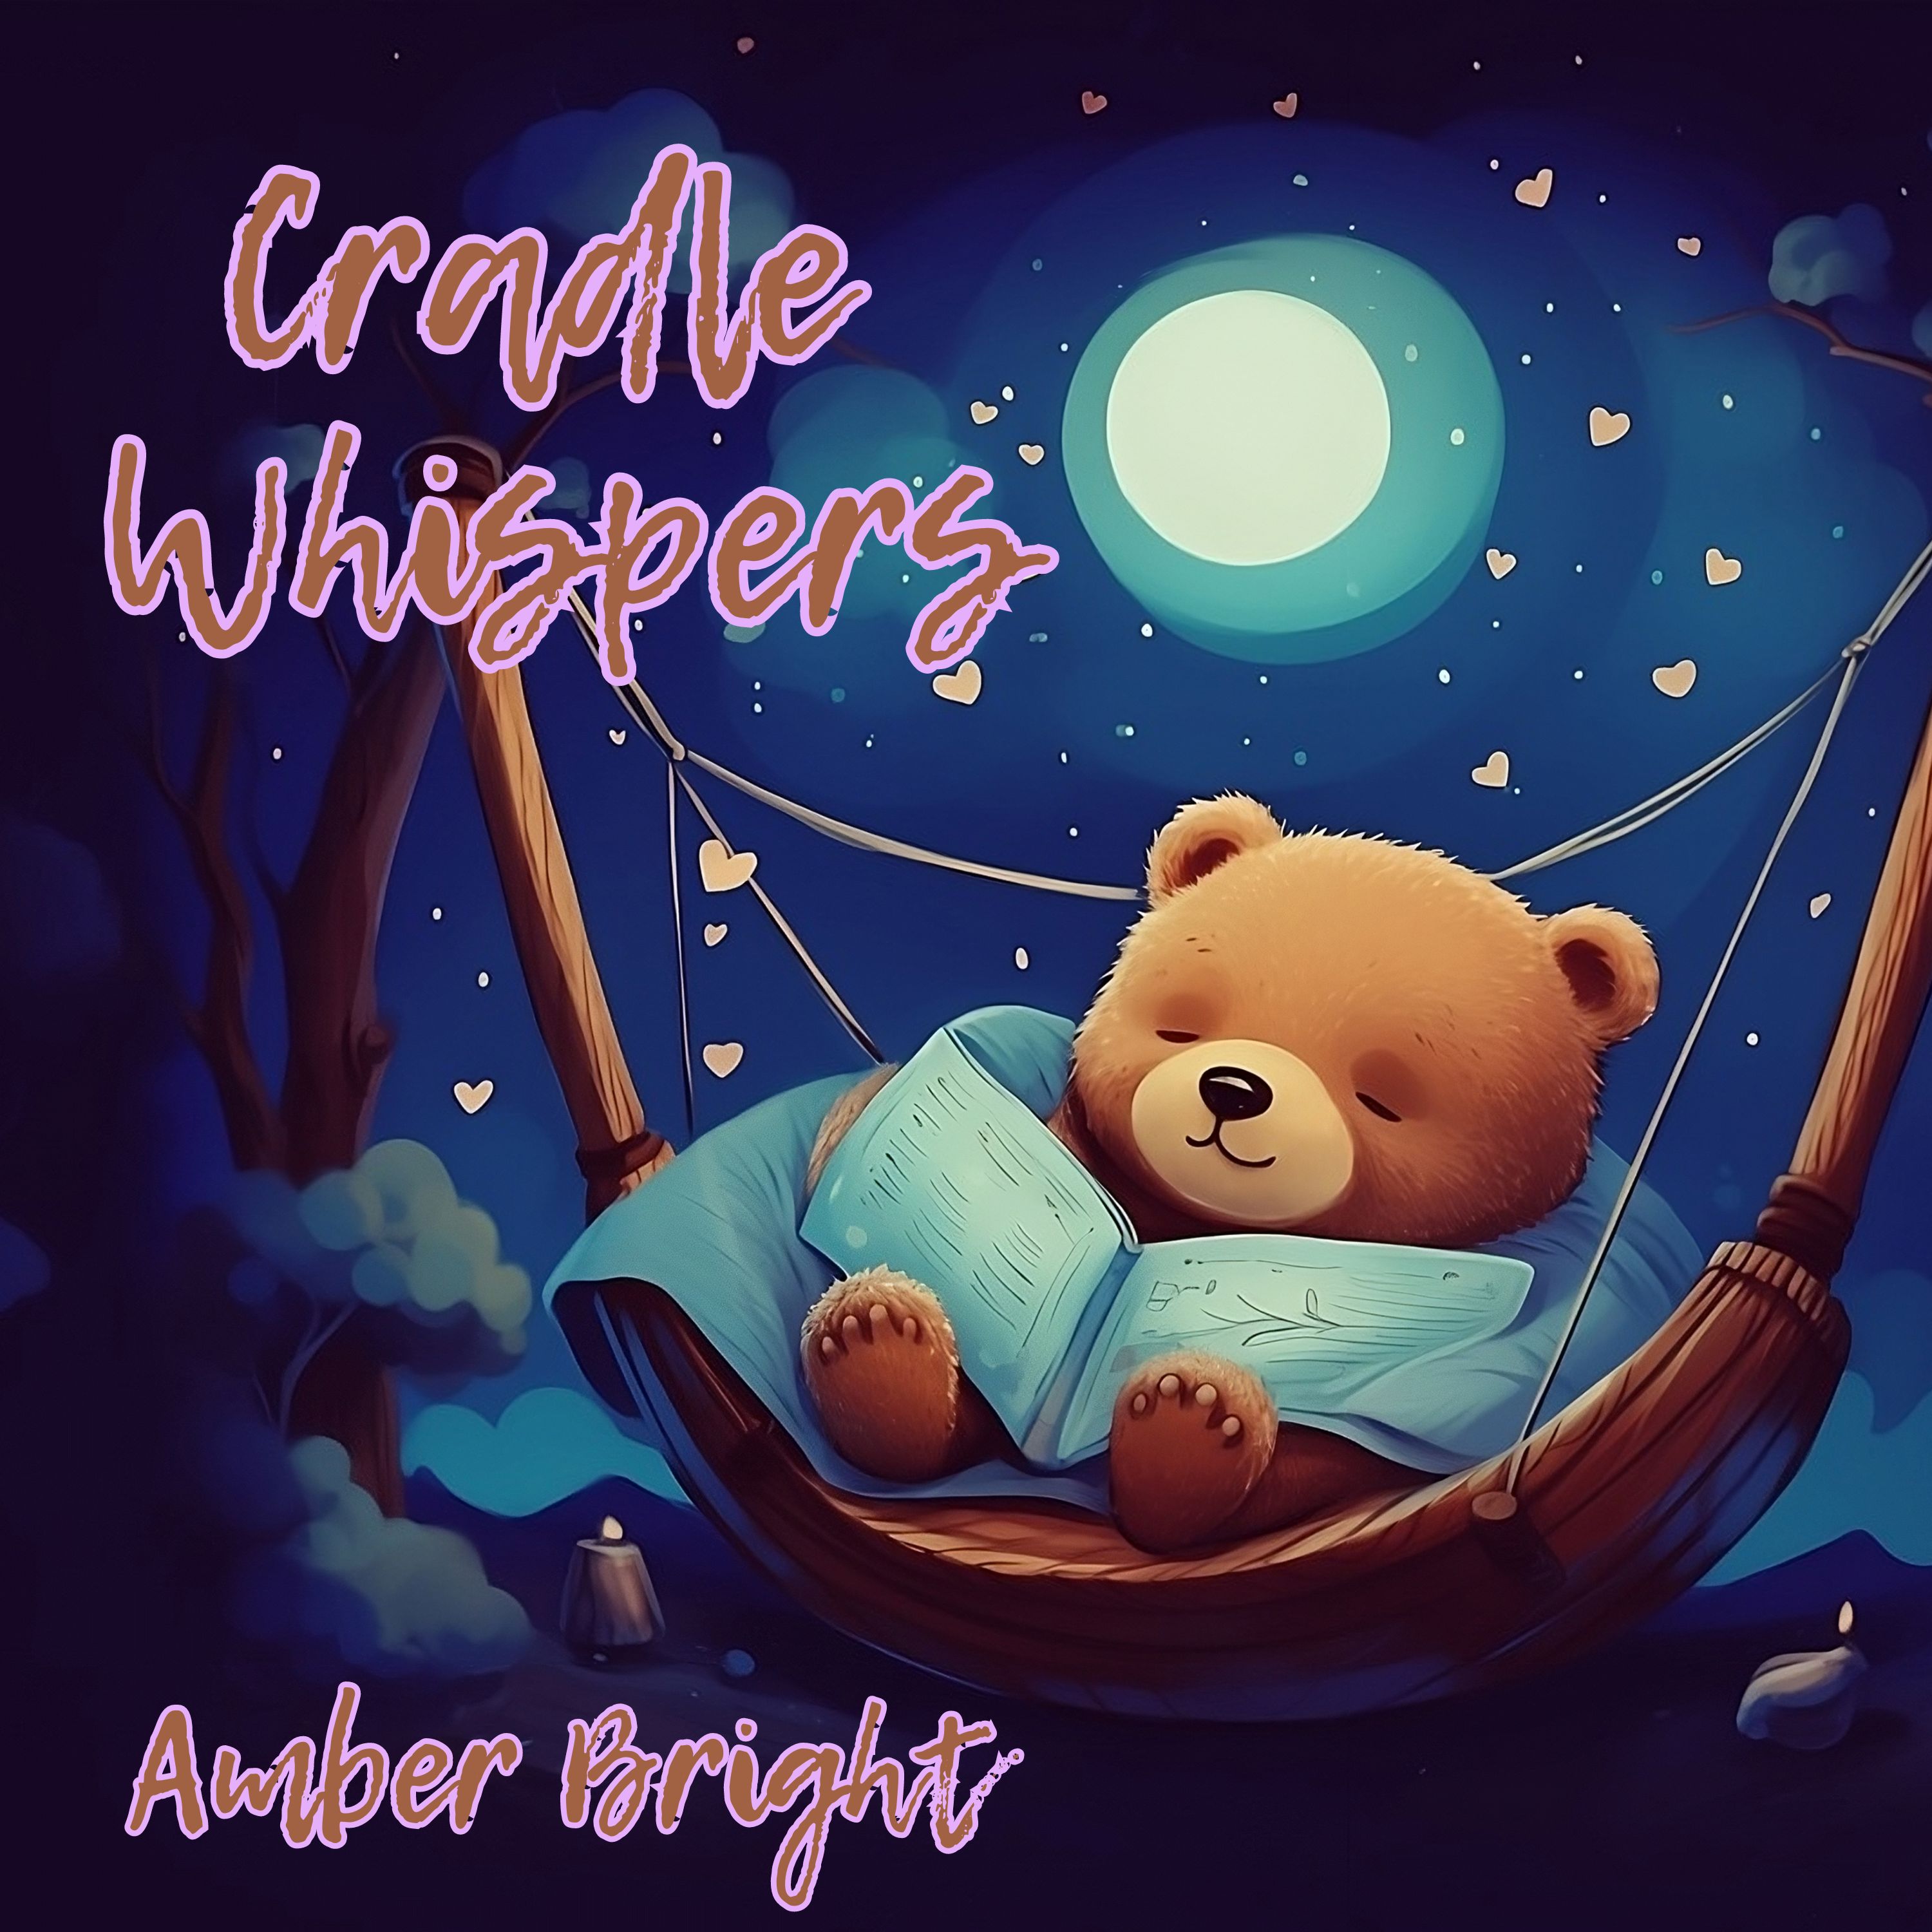 Cradle Whispers